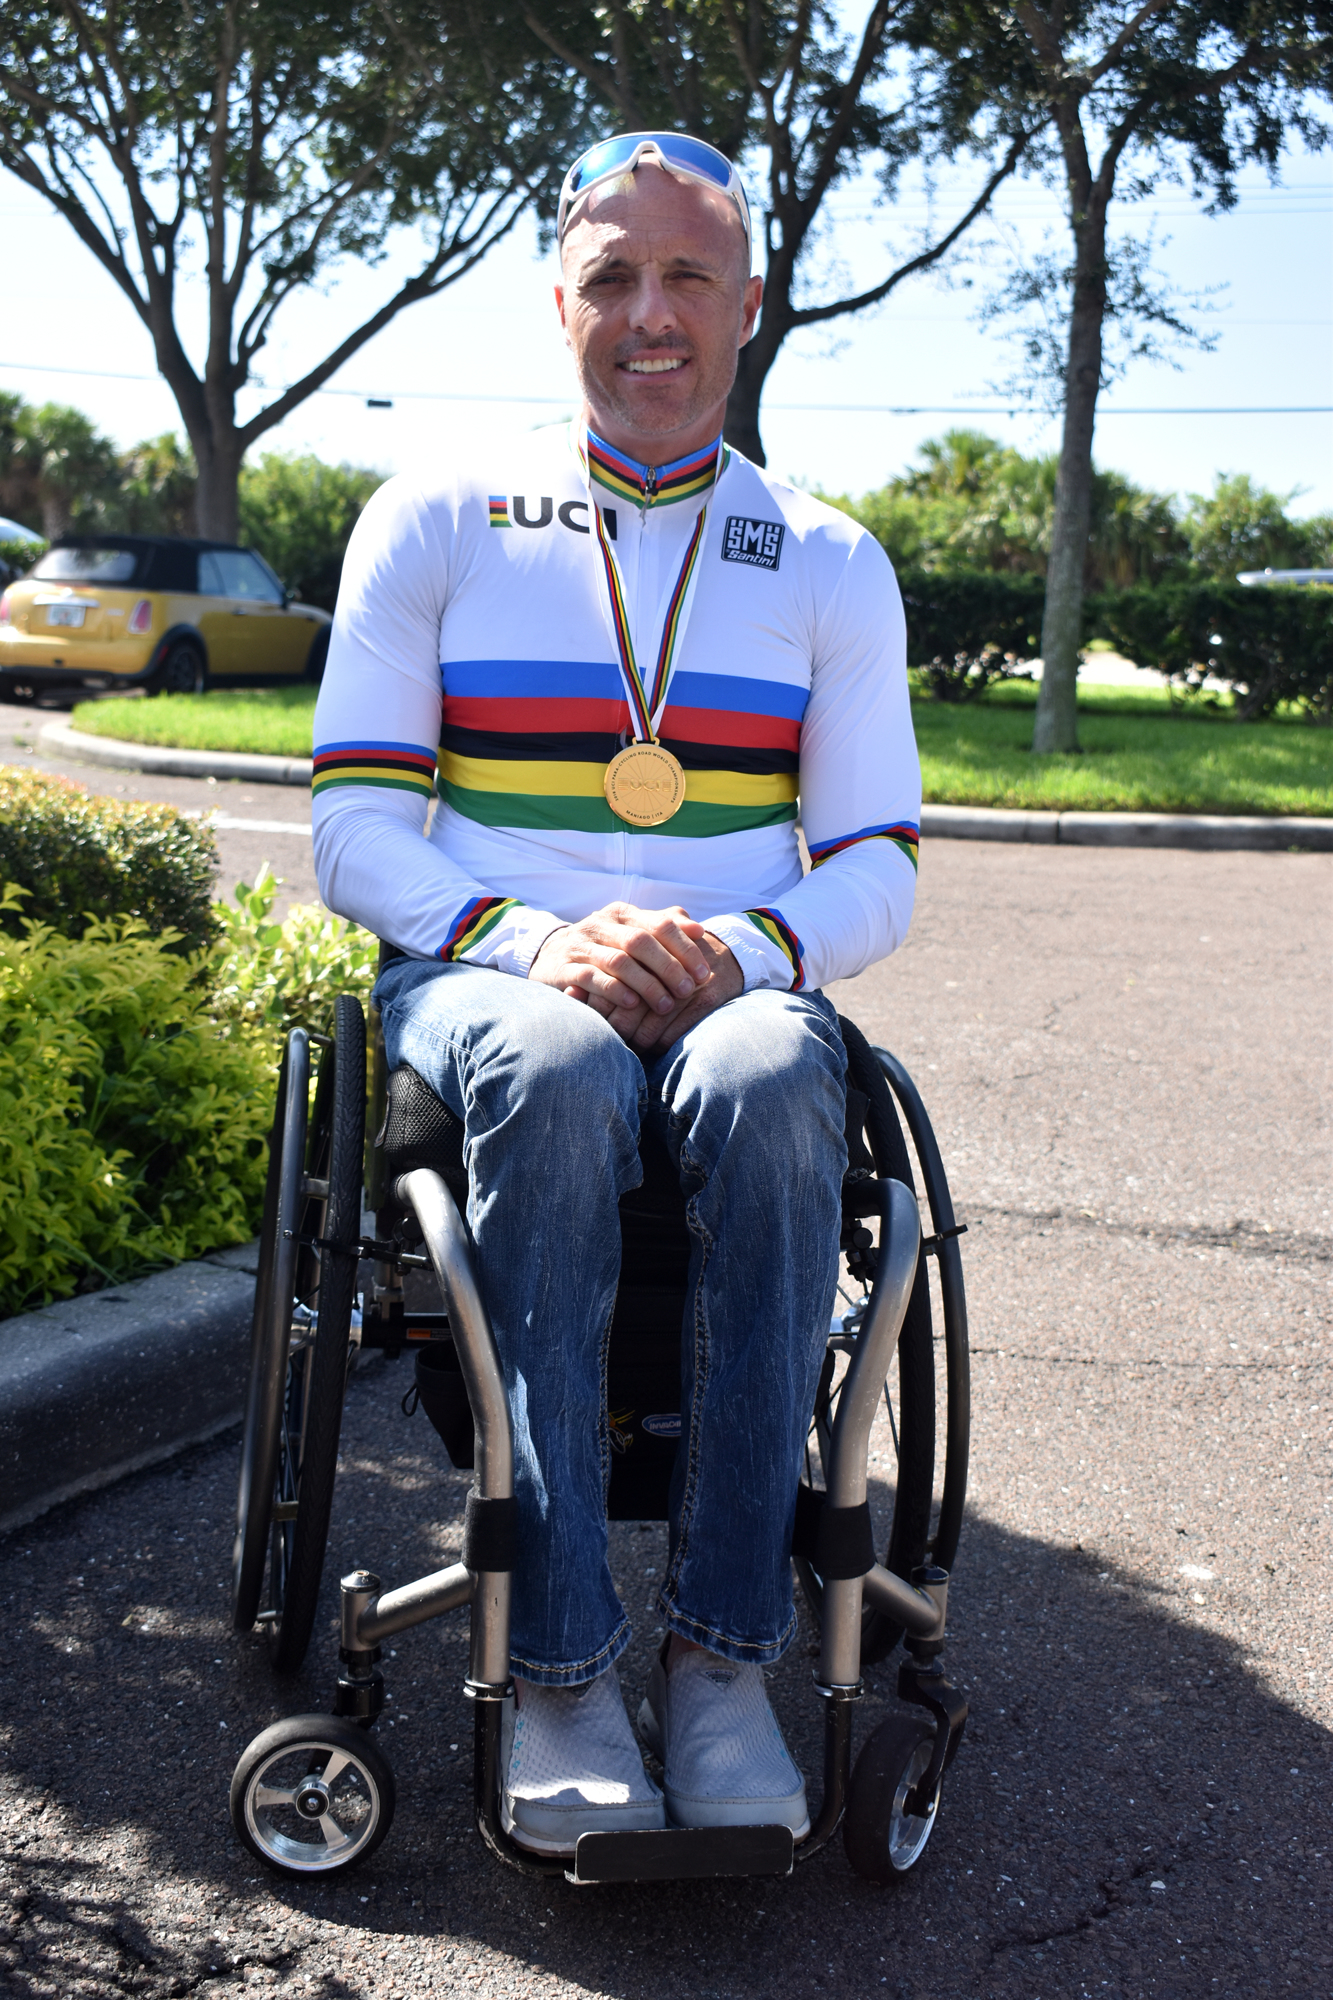 Most recently, Randall competed at the World Championships in Italy, which his hand cycling relay team won.